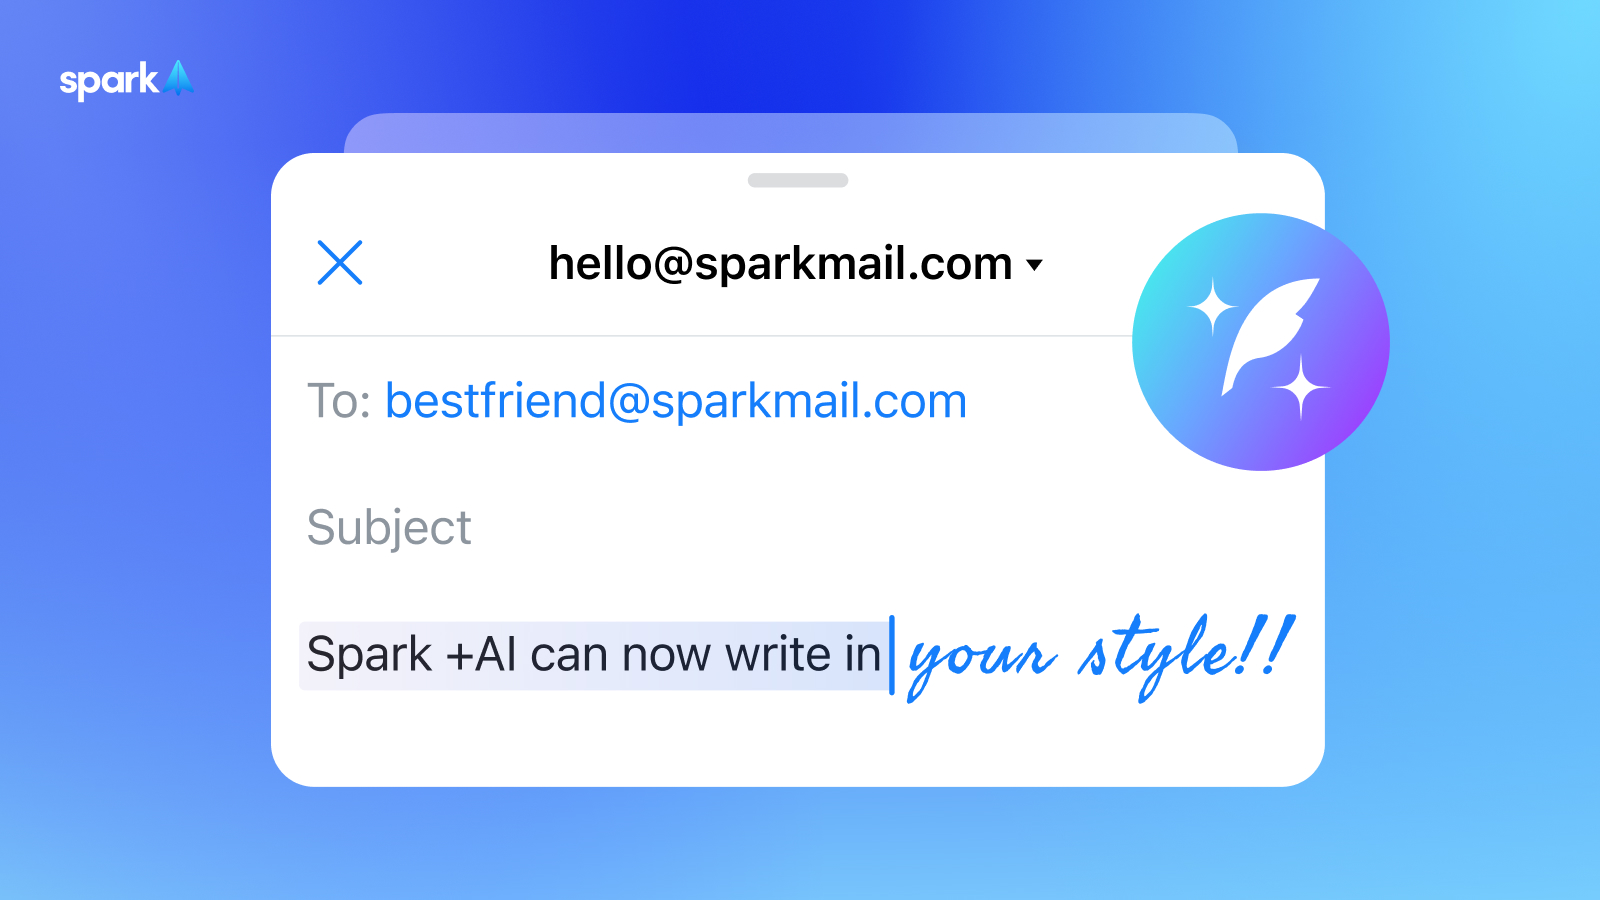 My Writing Style drafts +AI emails in your unique voice